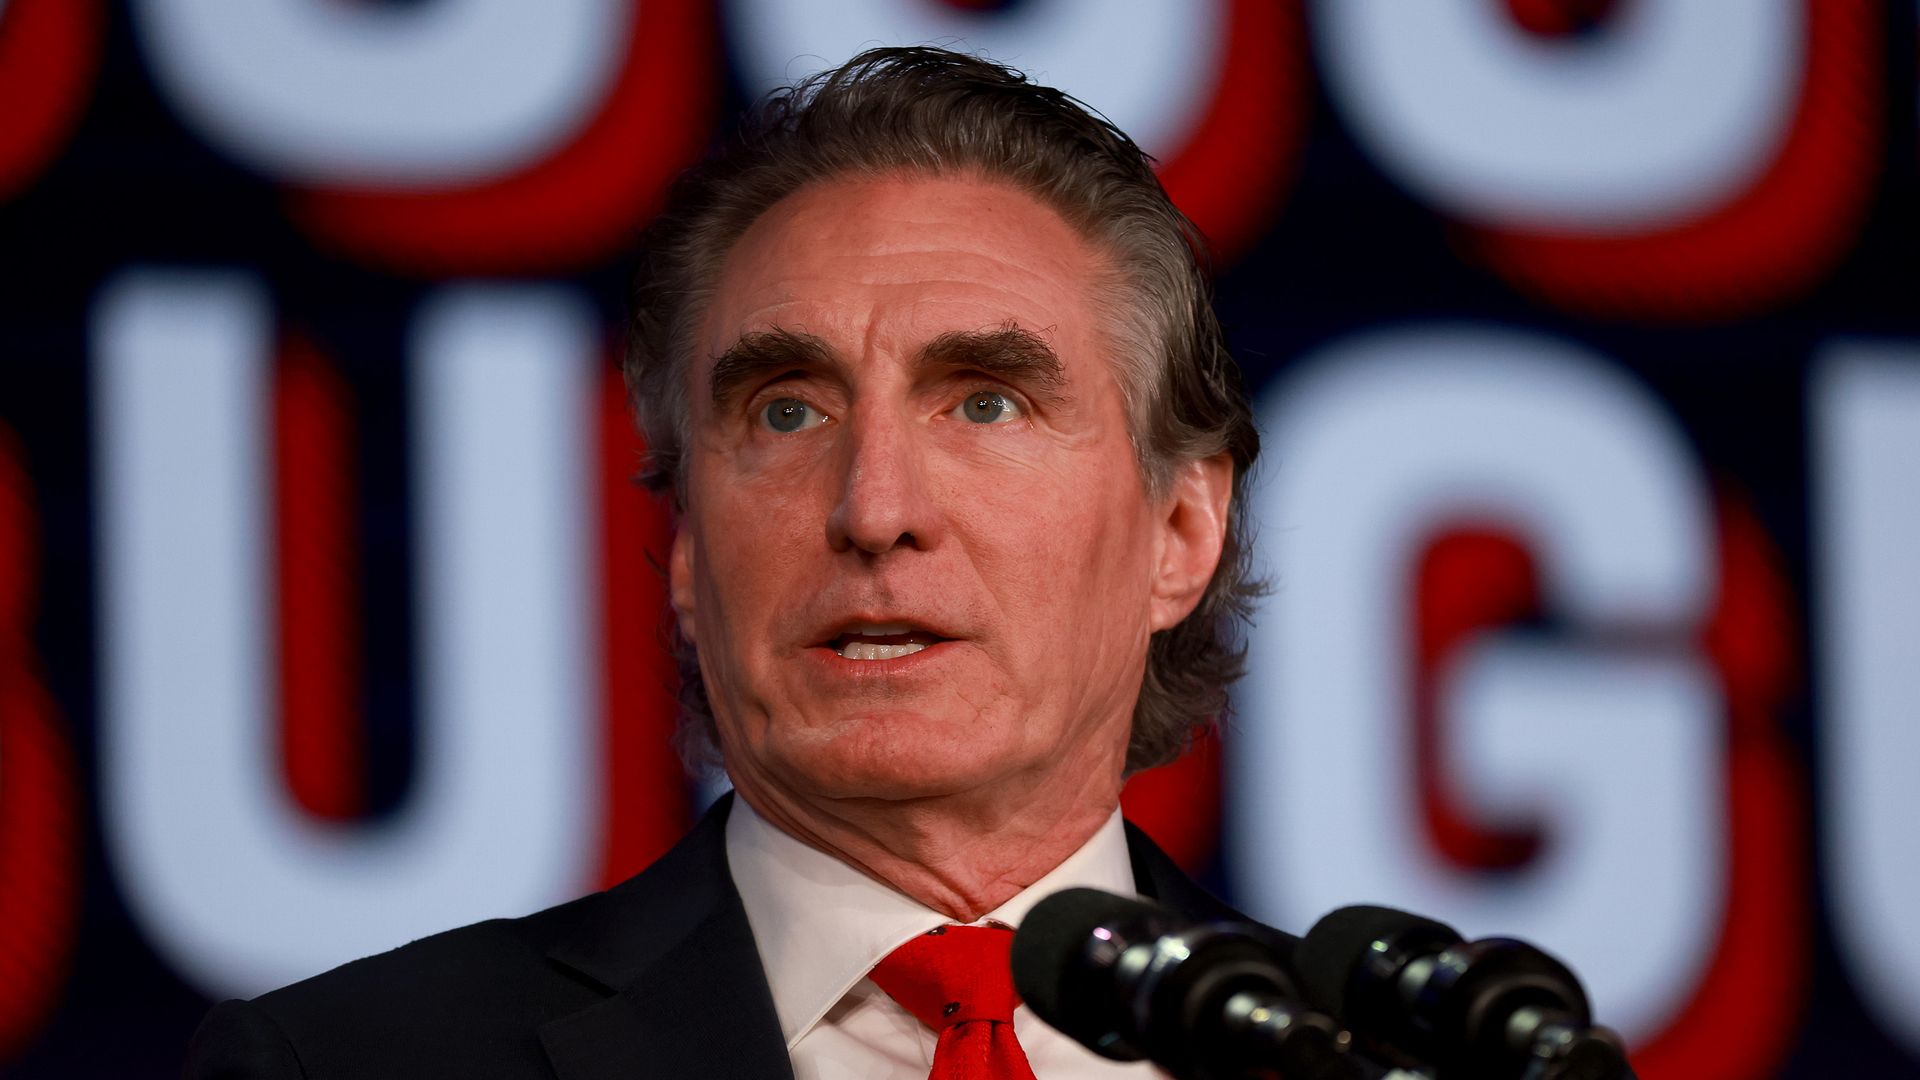  Republican presidential candidate North Dakota Governor Doug Burgum speaks during the Florida Freedom Summit held at the Gaylord Palms Resort on November 04, 2023 in Kissimmee, Florida.